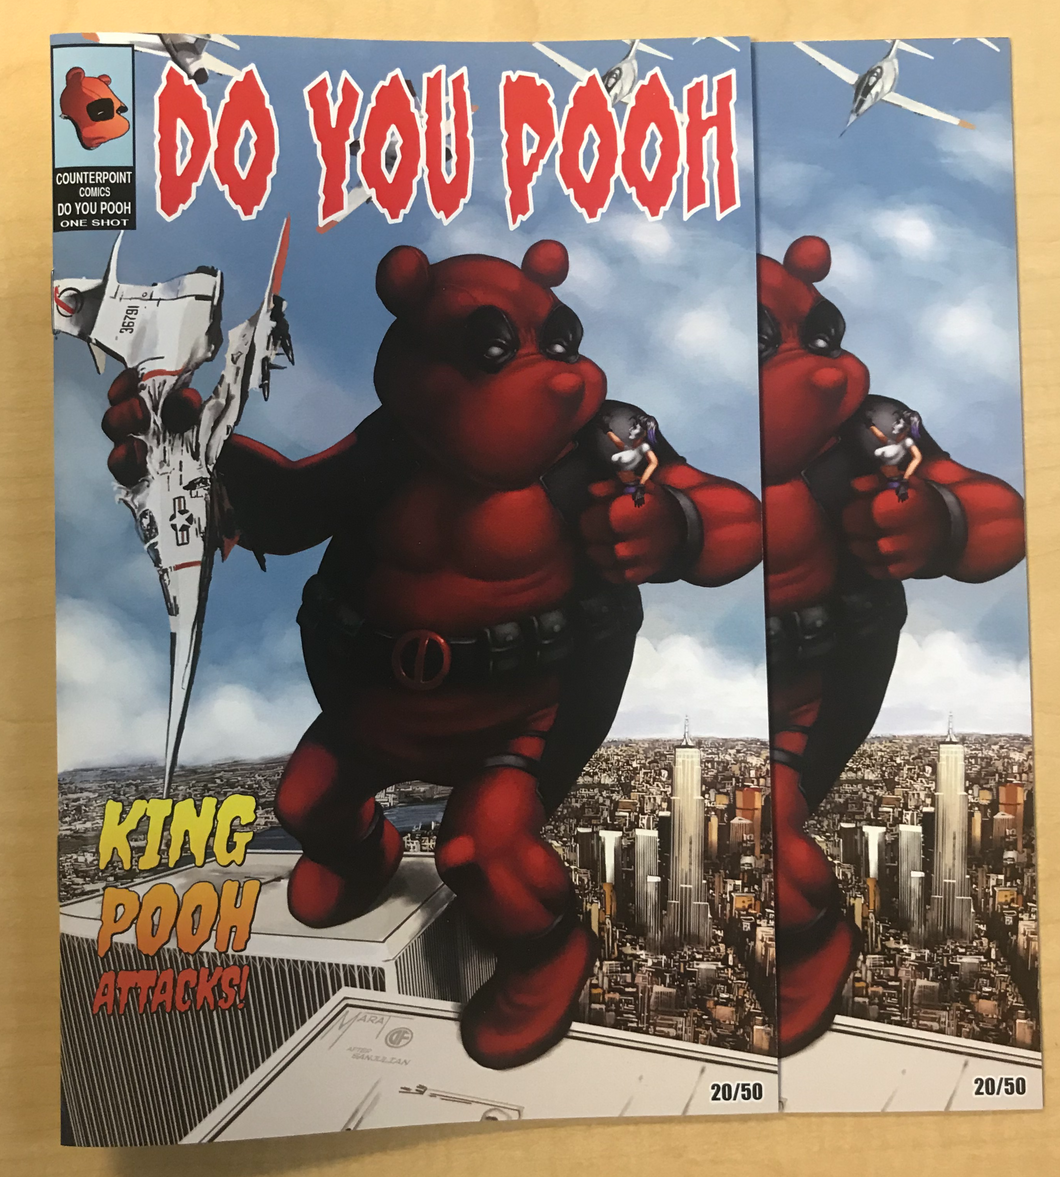 Do You Pooh? #1 Famous Monsters #290 KING KONG Homage LOGO & VIRGIN Variant Covers 2 book Set by Marat Mychaels Only 50 Made!!!